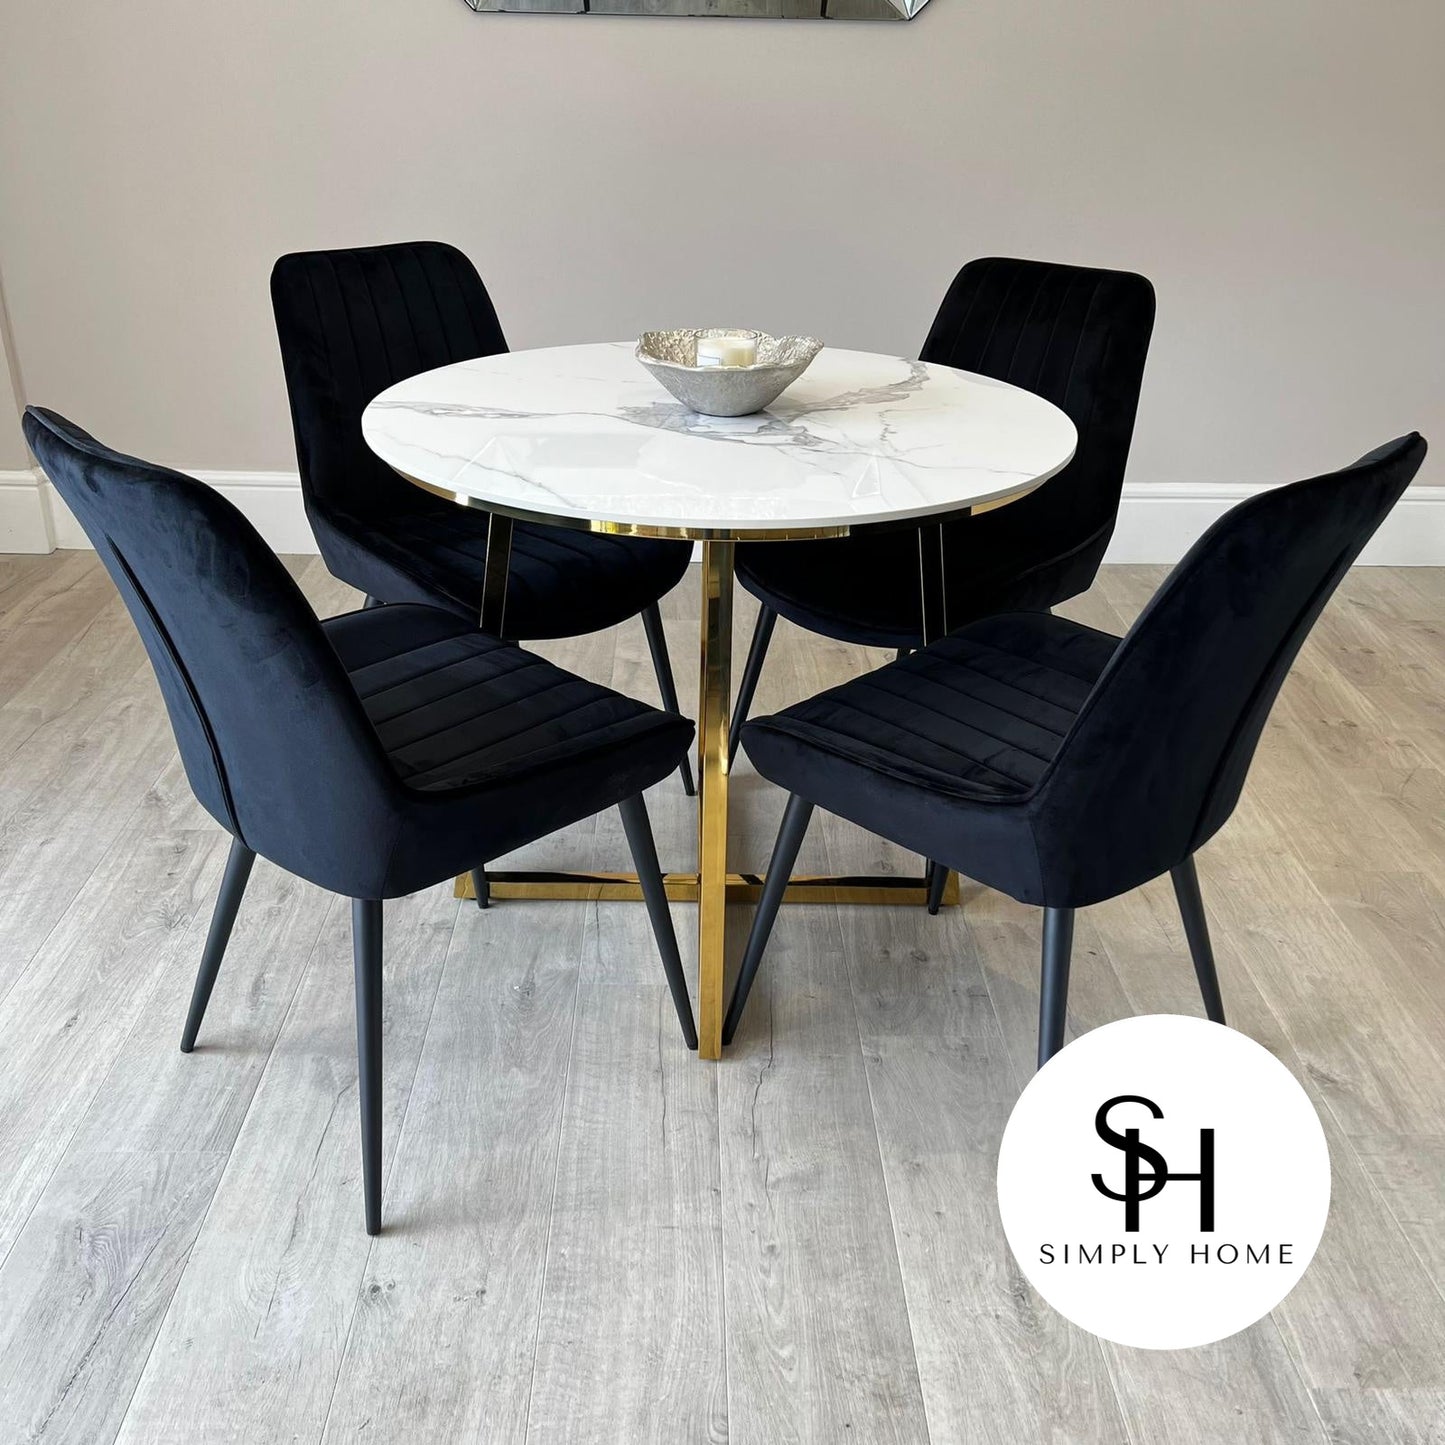 Julio White Marble Table Dining Table with Black Luca Chairs